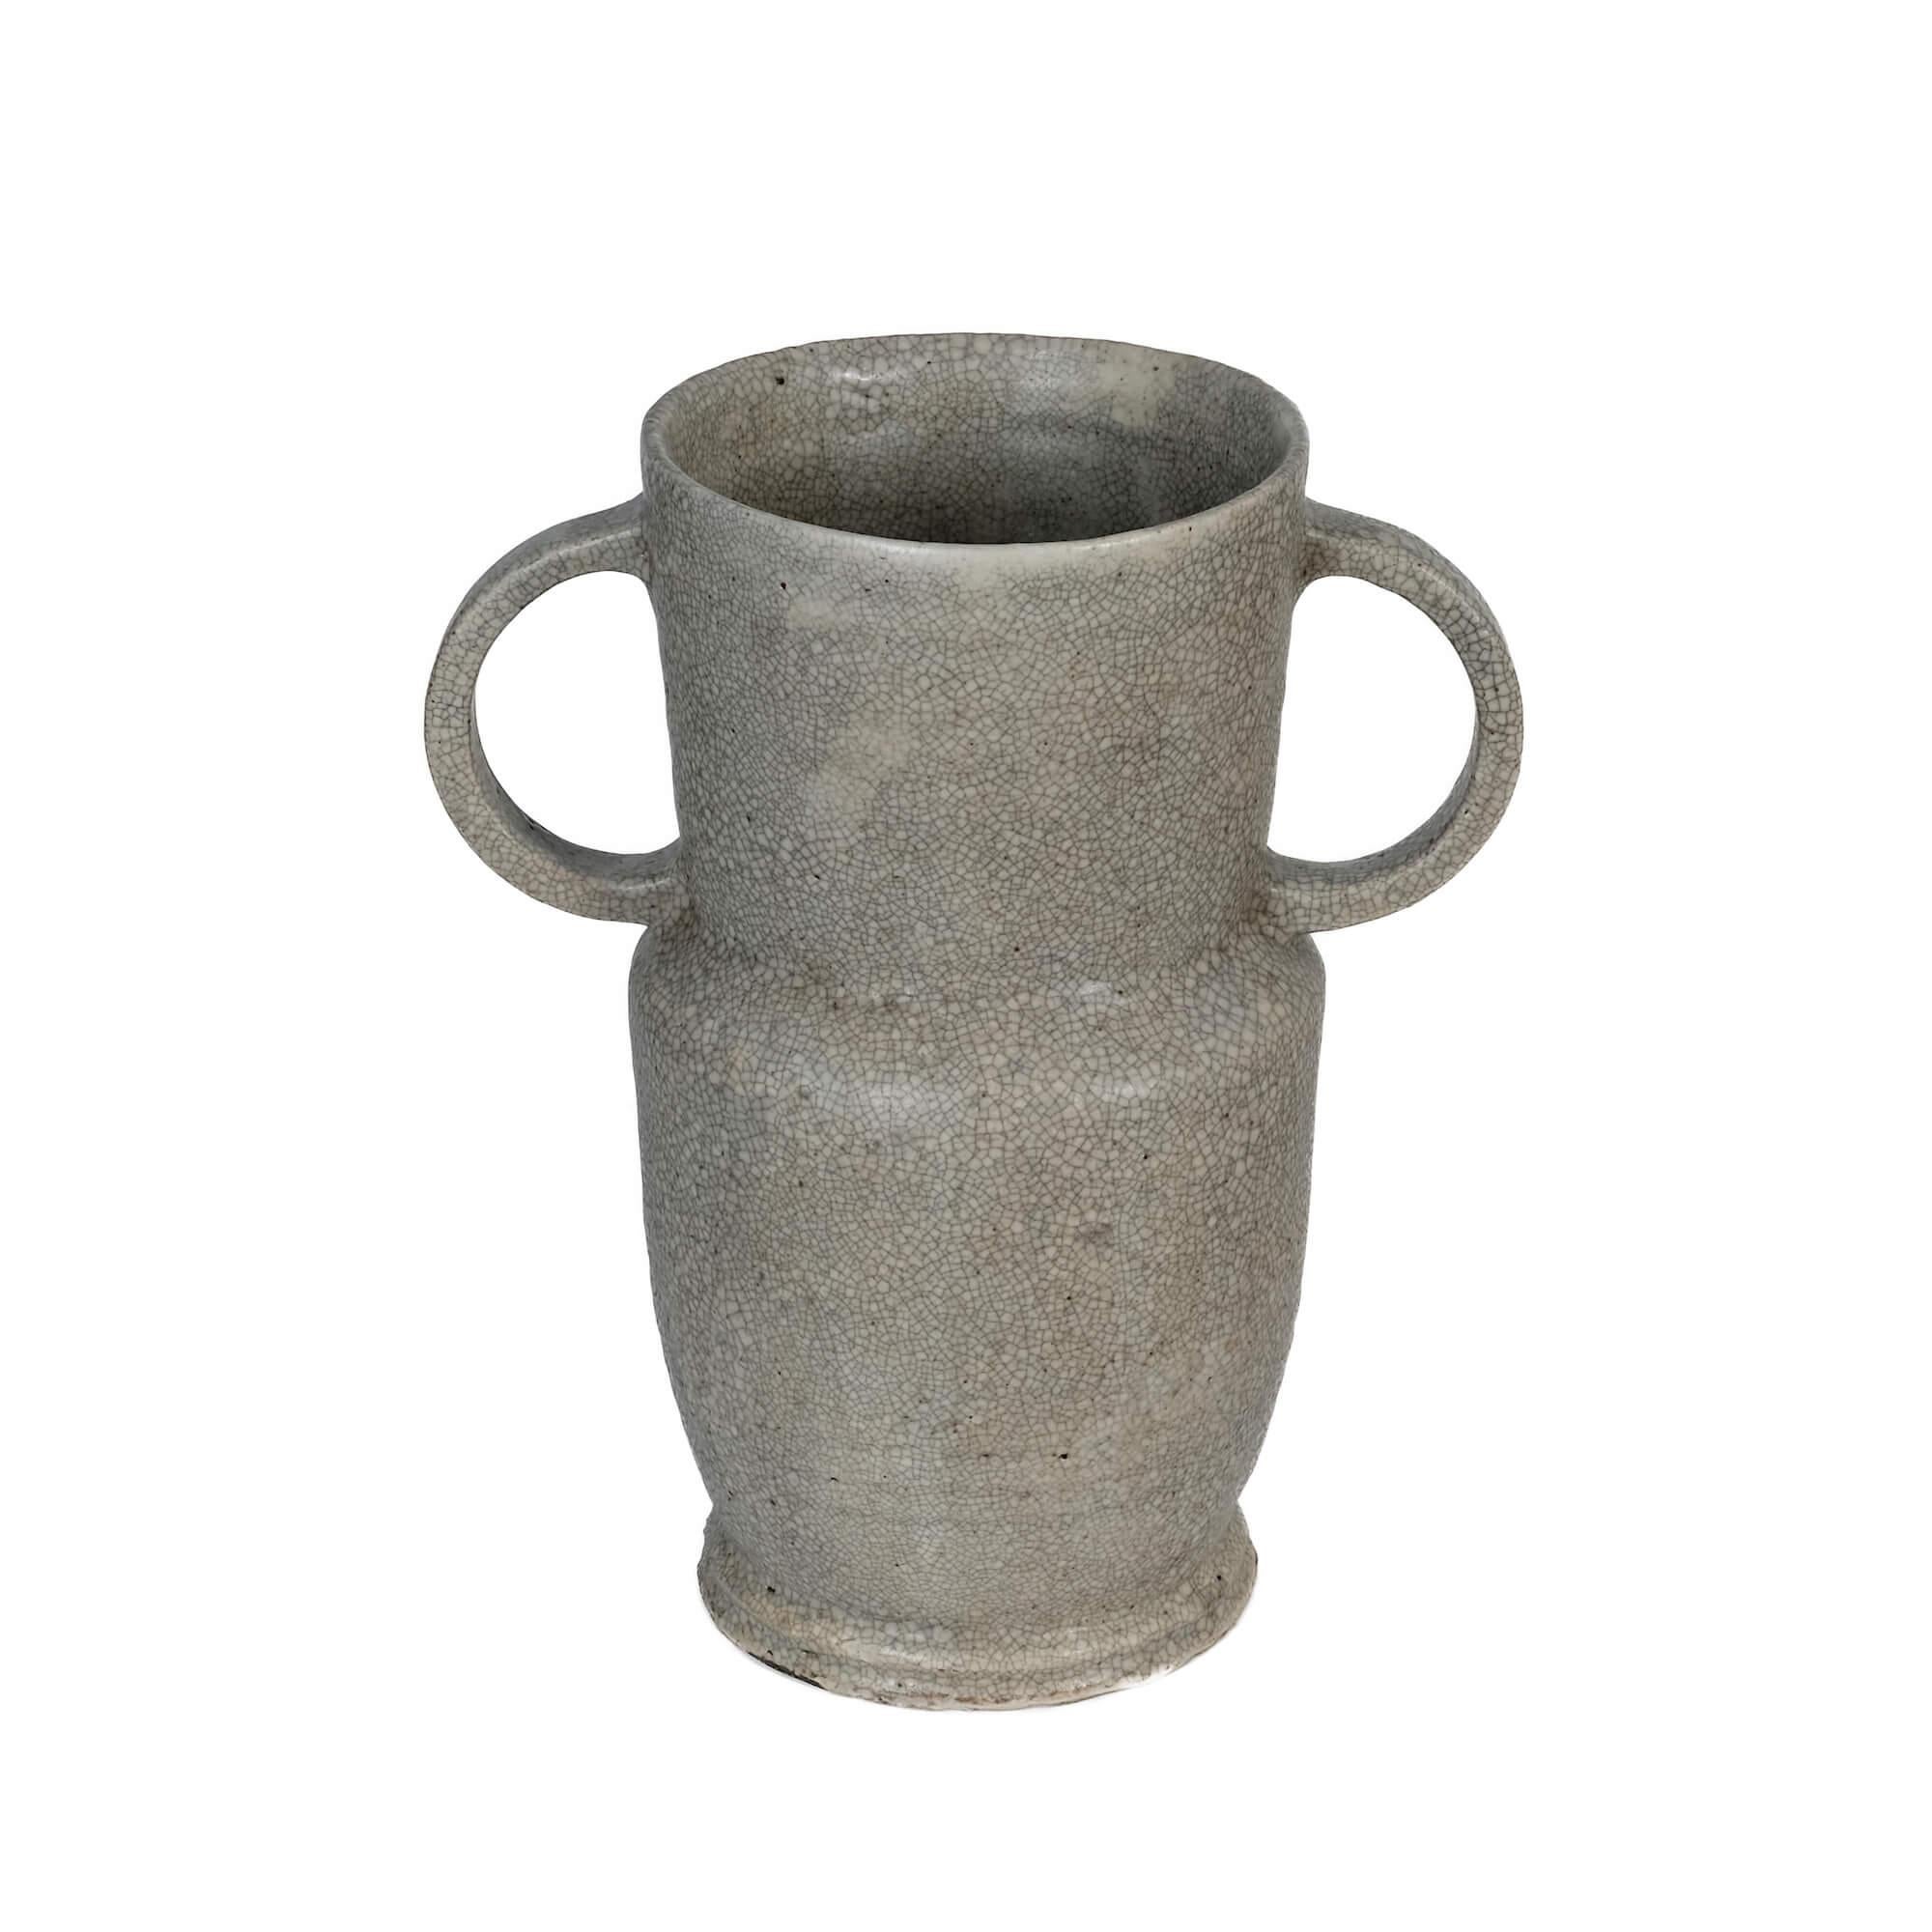 Cohiki Vetus vase I by Studio Cúze
Dimensions: W 23 x H 26 cm
Materials: ceramic

With its handles and rustic appearance, this vase exudes an antique flair. Pottery and high-quality ceramics do the rest. For the vase, the basic idea of perfect